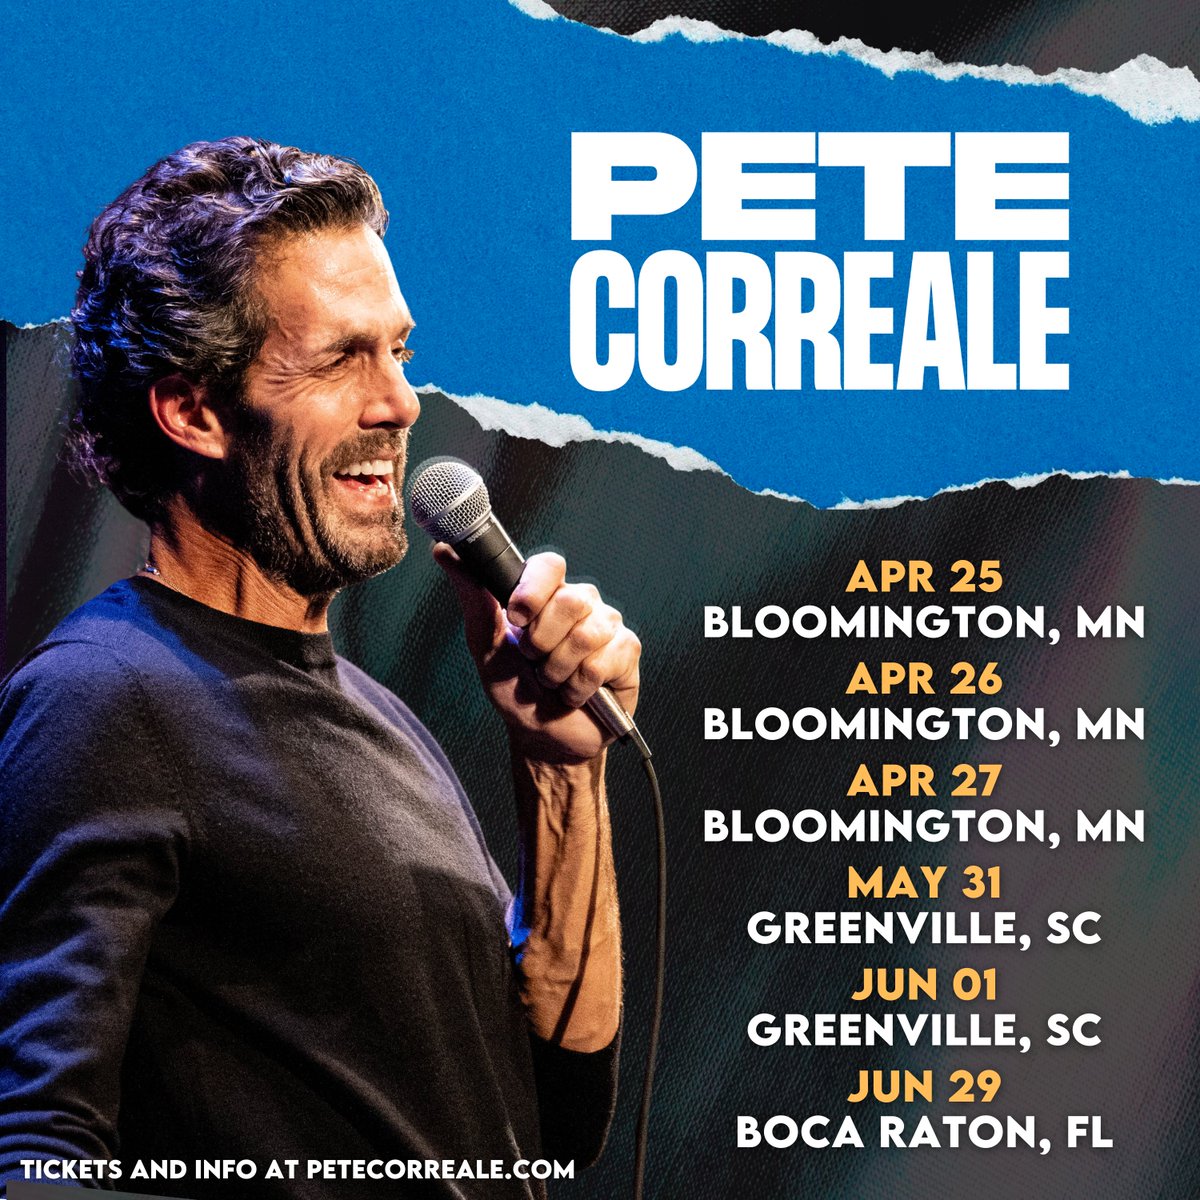 Coming to you live from my basement to announce some new tour dates! Which city will you be stopping by? Get your tickets at: petecorreale.com